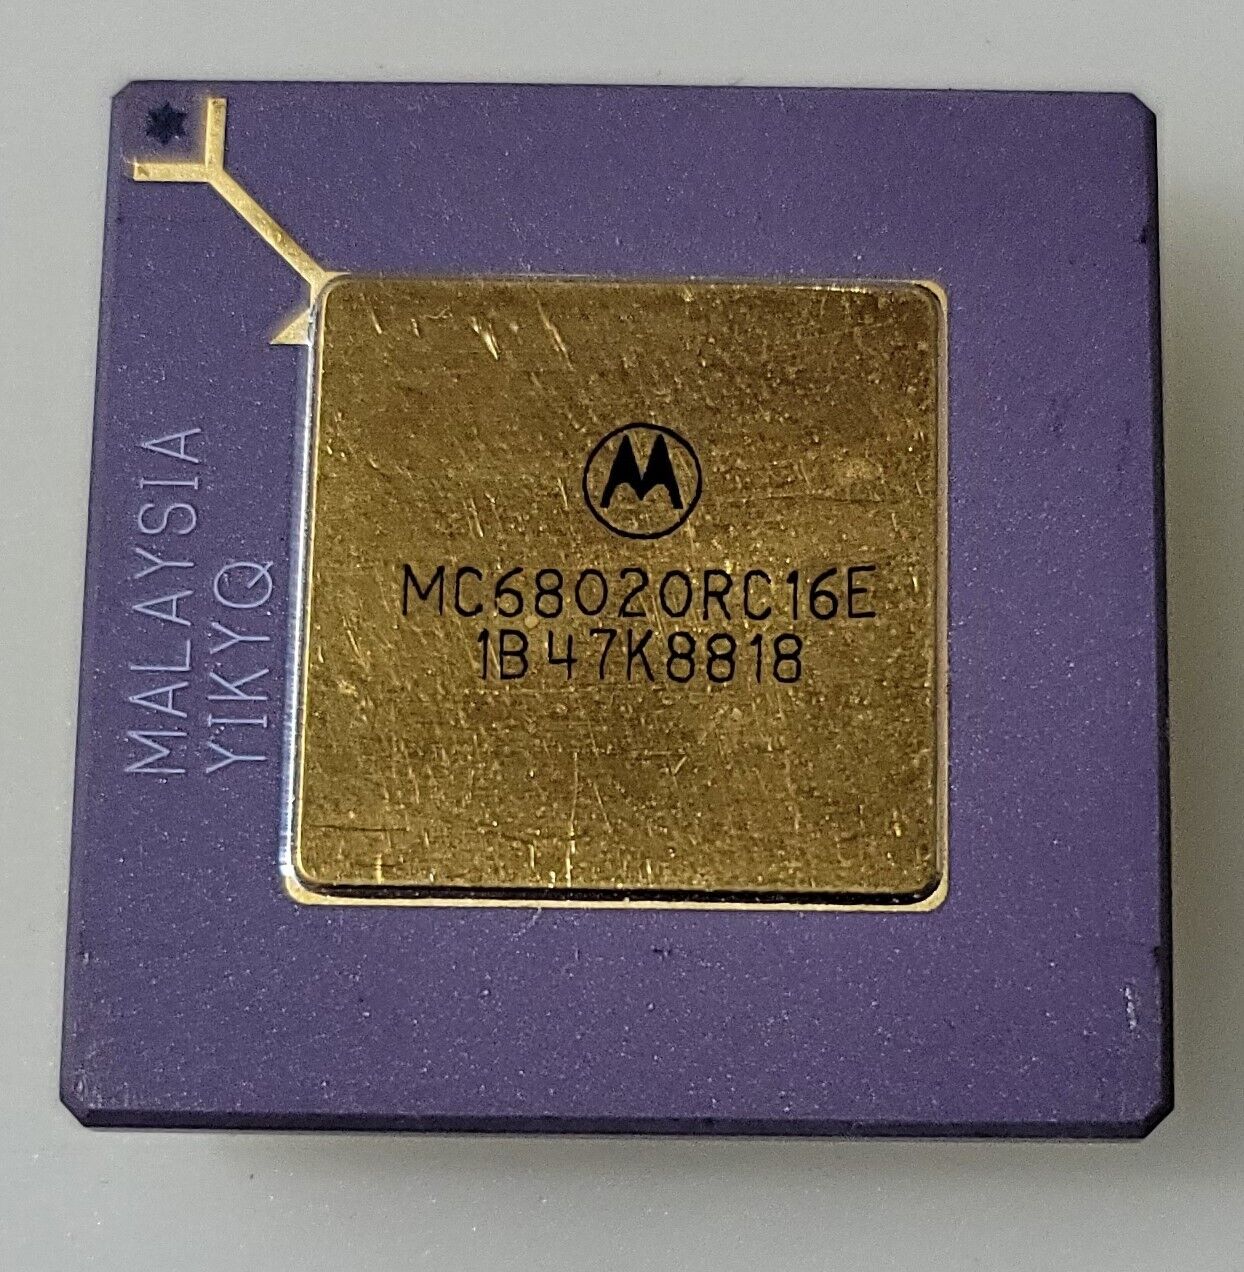 Vintage Rare Motorola MC68020RC16E Processor For Collection or Gold Recovery